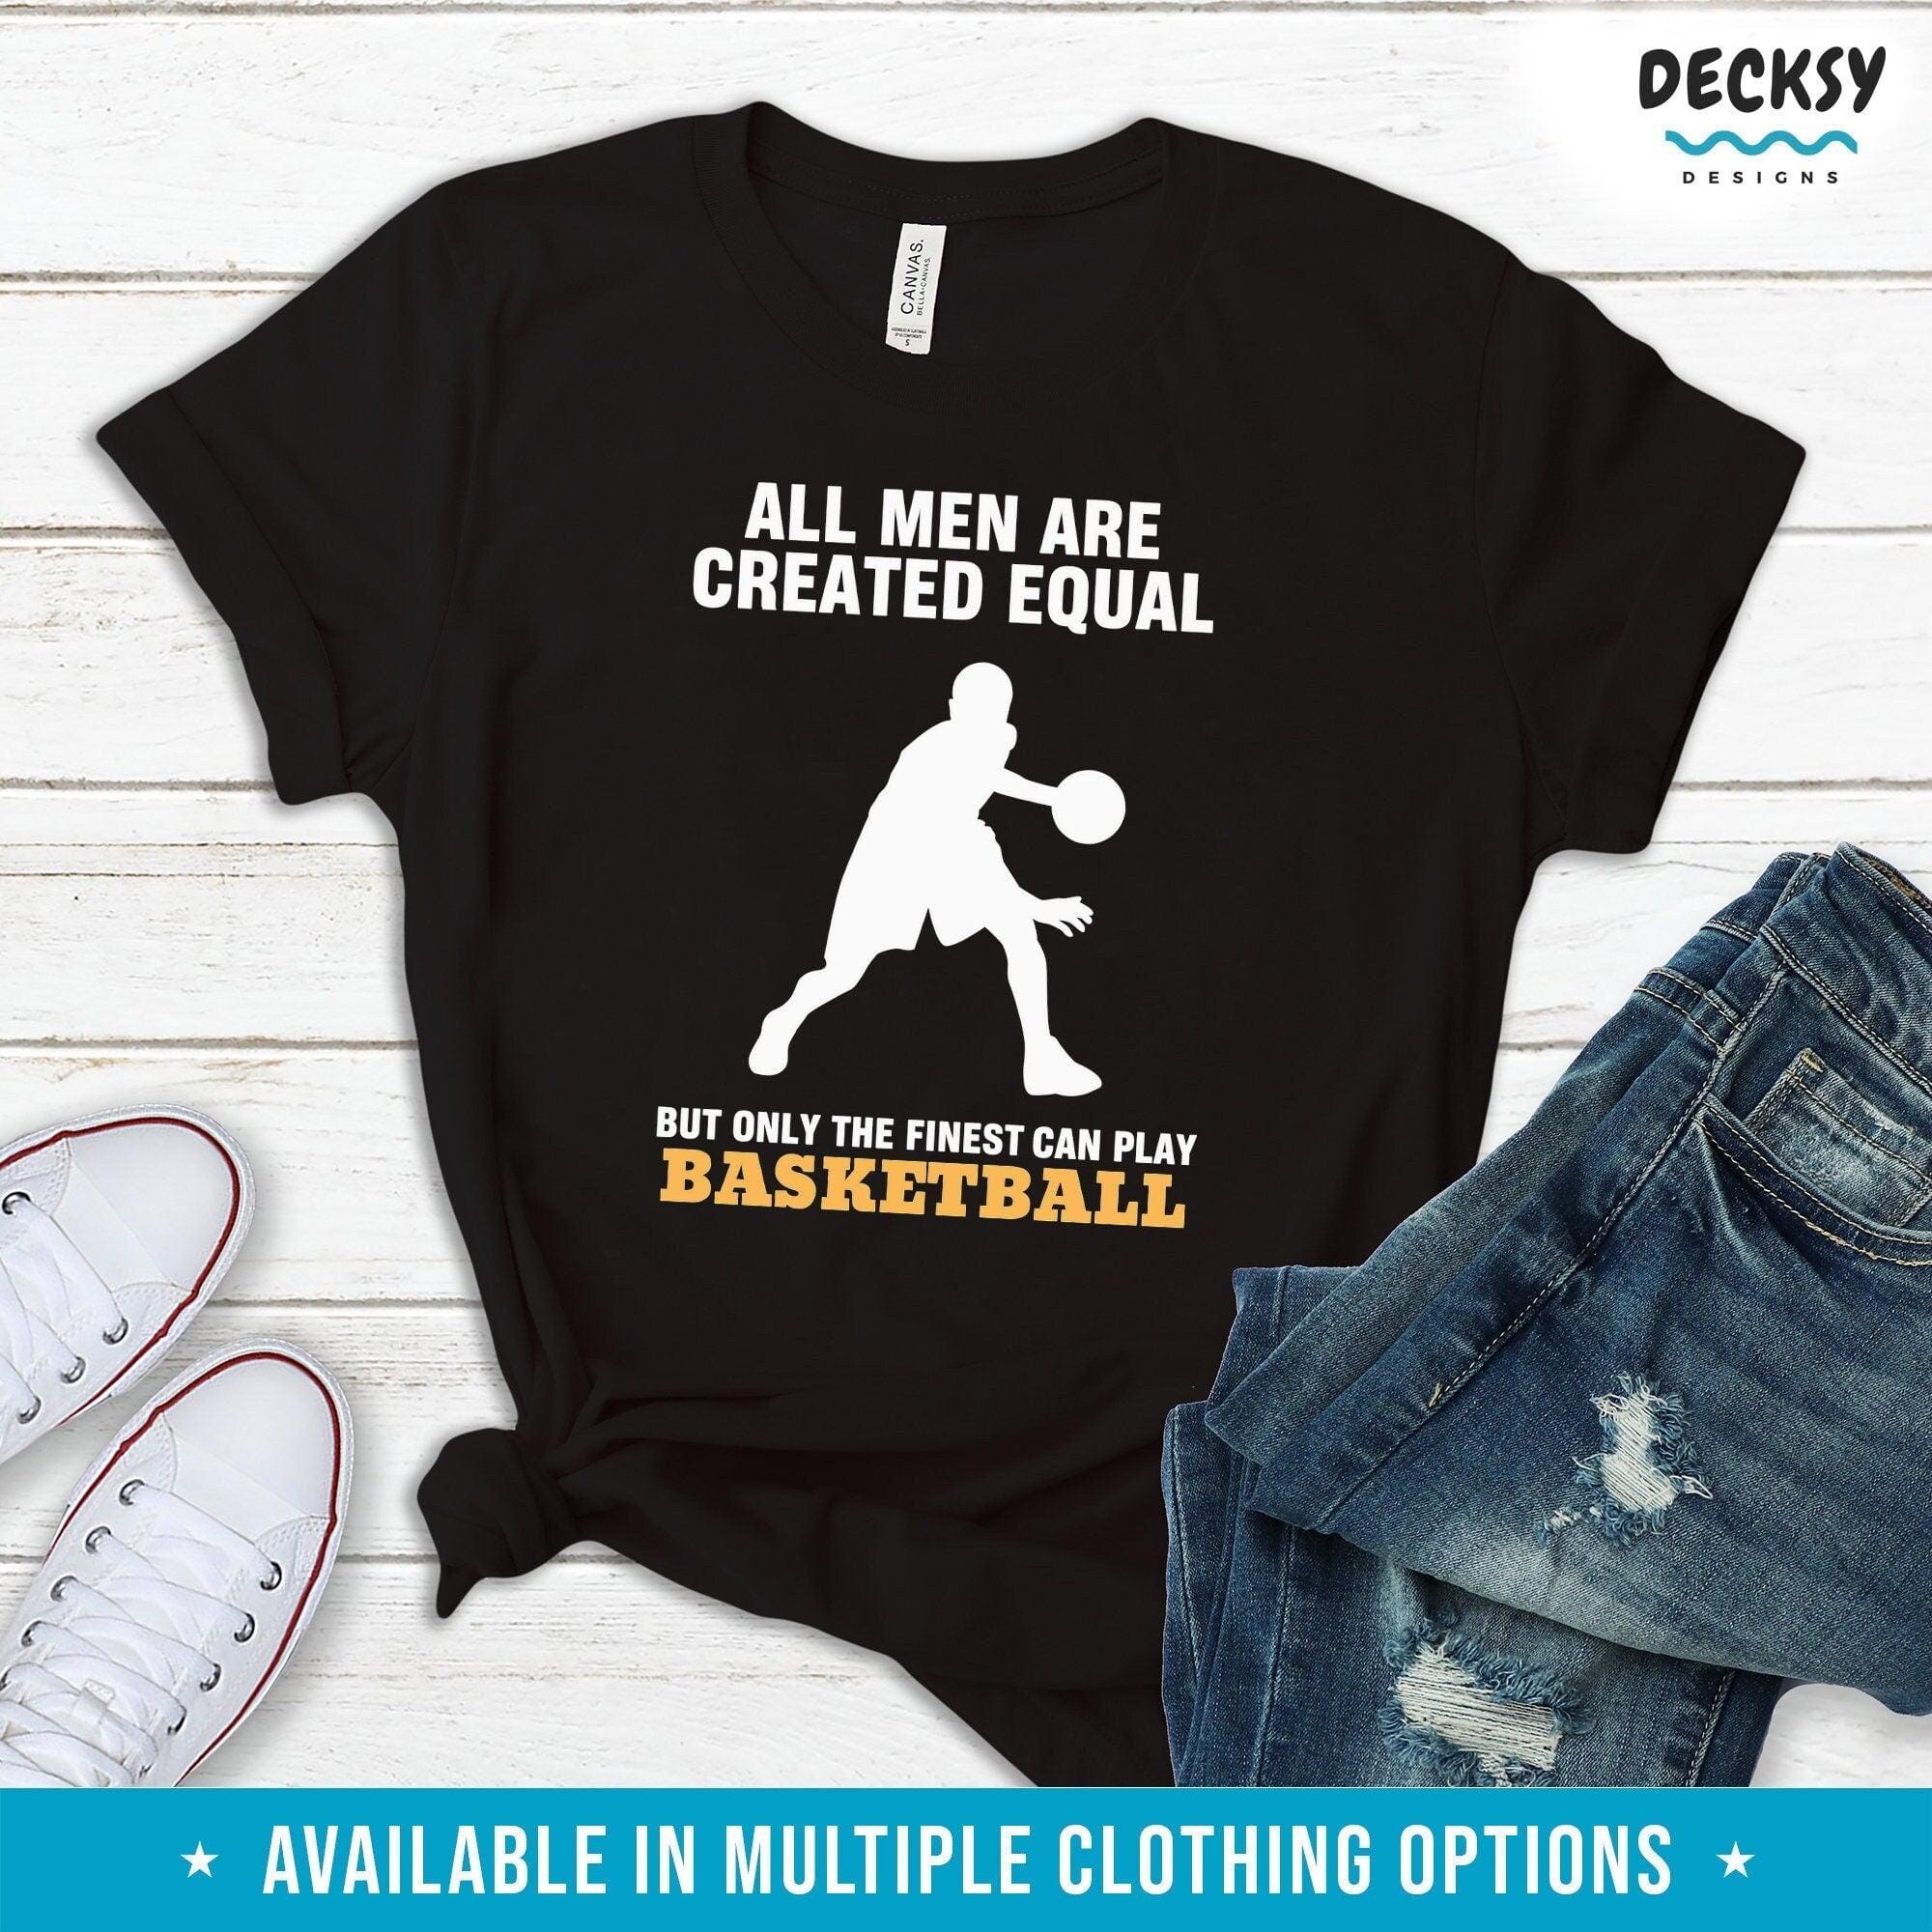 Basketball Shirt Men, Basketball Player Gift-Clothing:Gender-Neutral Adult Clothing:Tops & Tees:T-shirts:Graphic Tees-DecksyDesigns